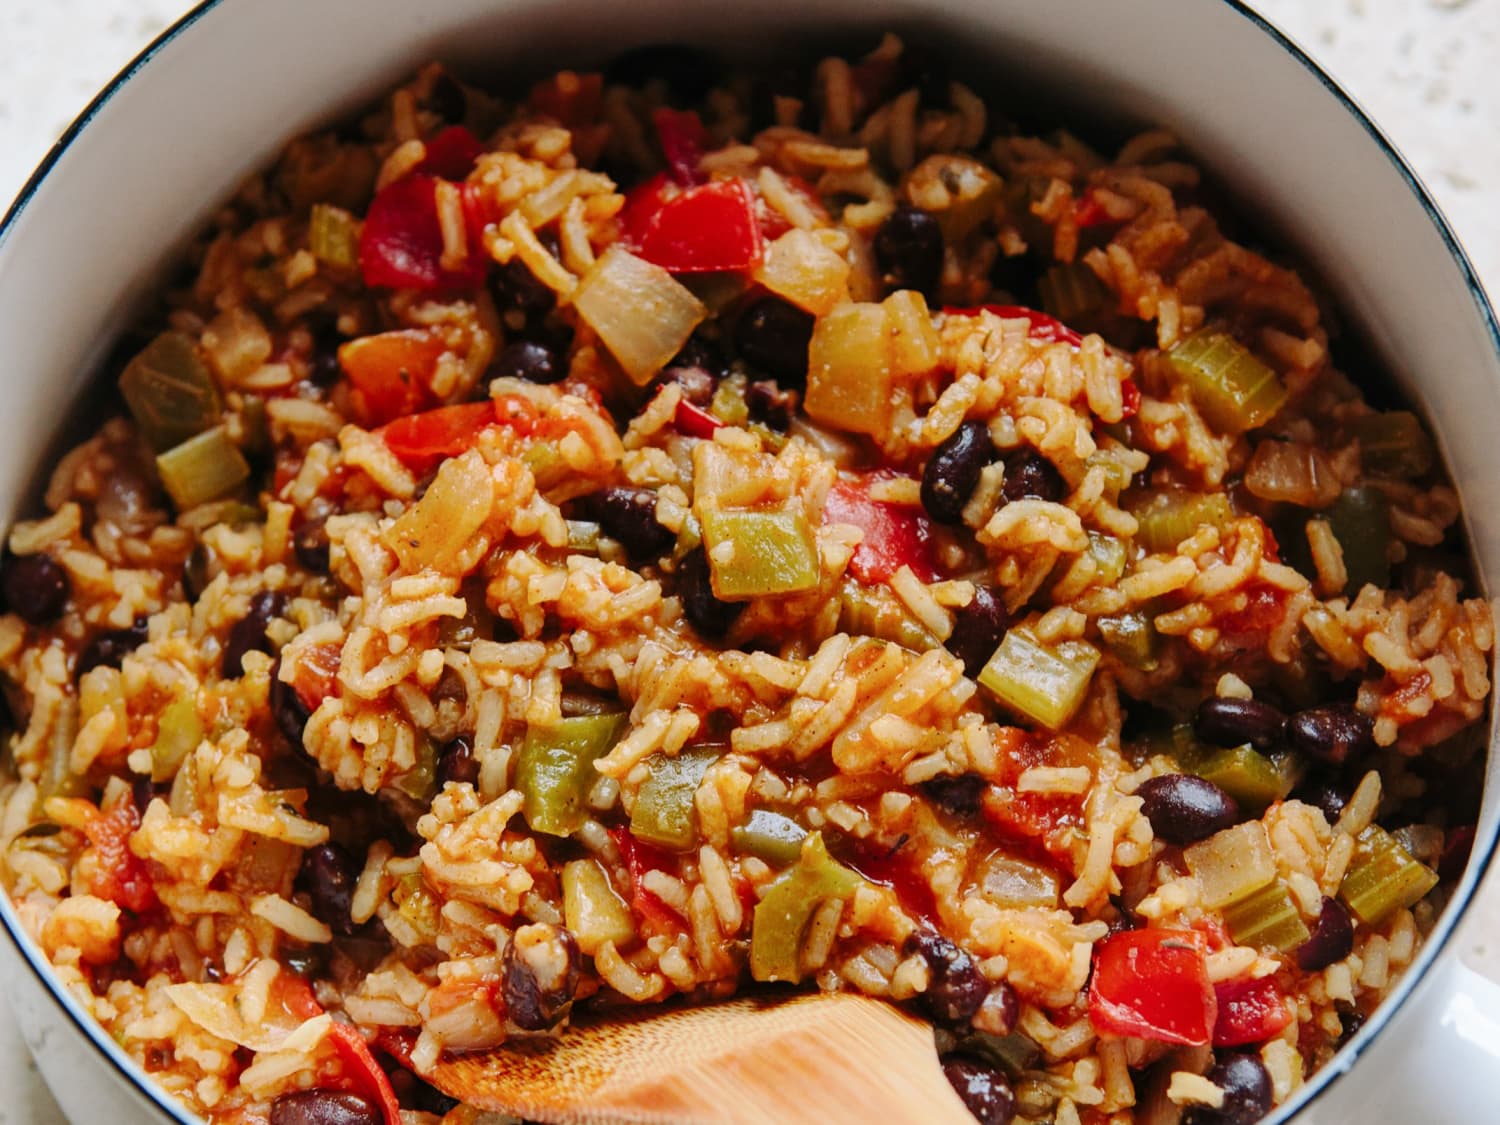 What Vegetables Go In Jambalaya